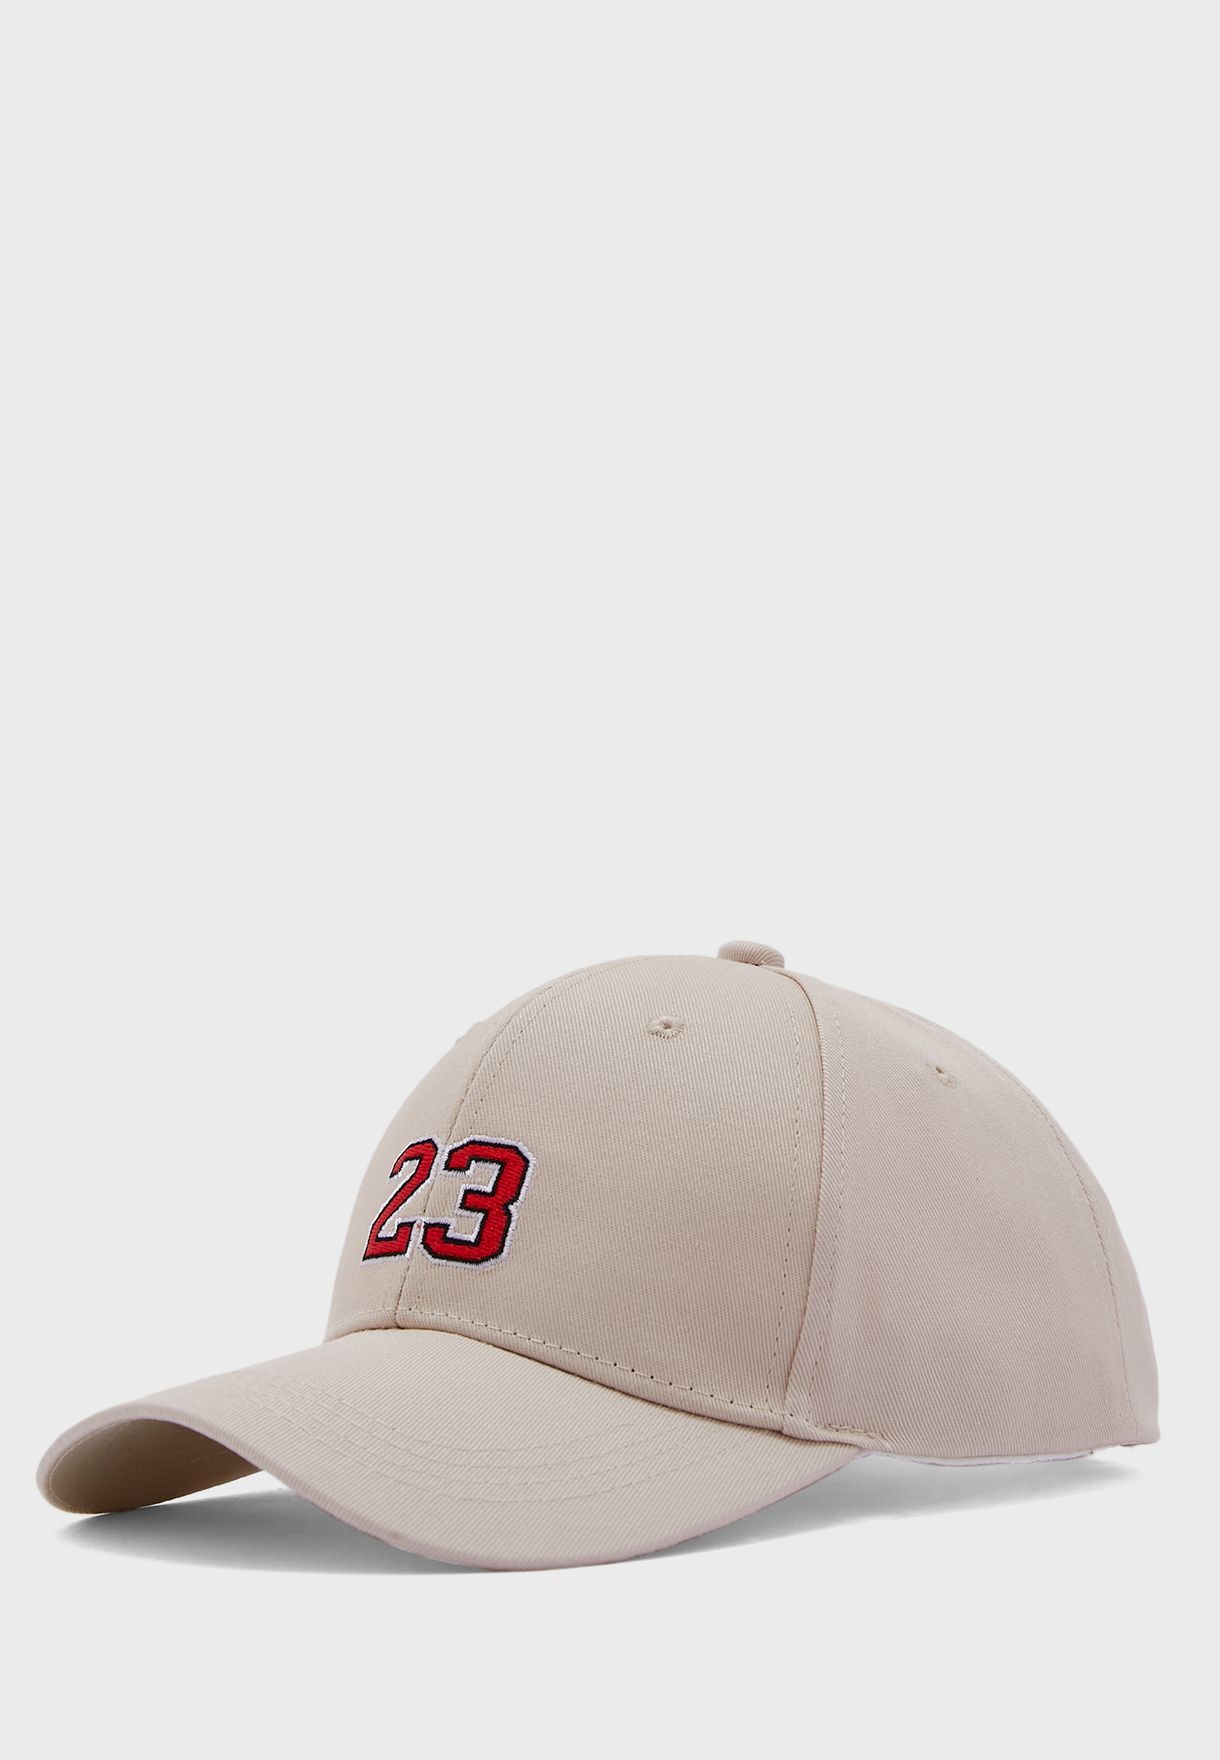 23 Embroidered Cap